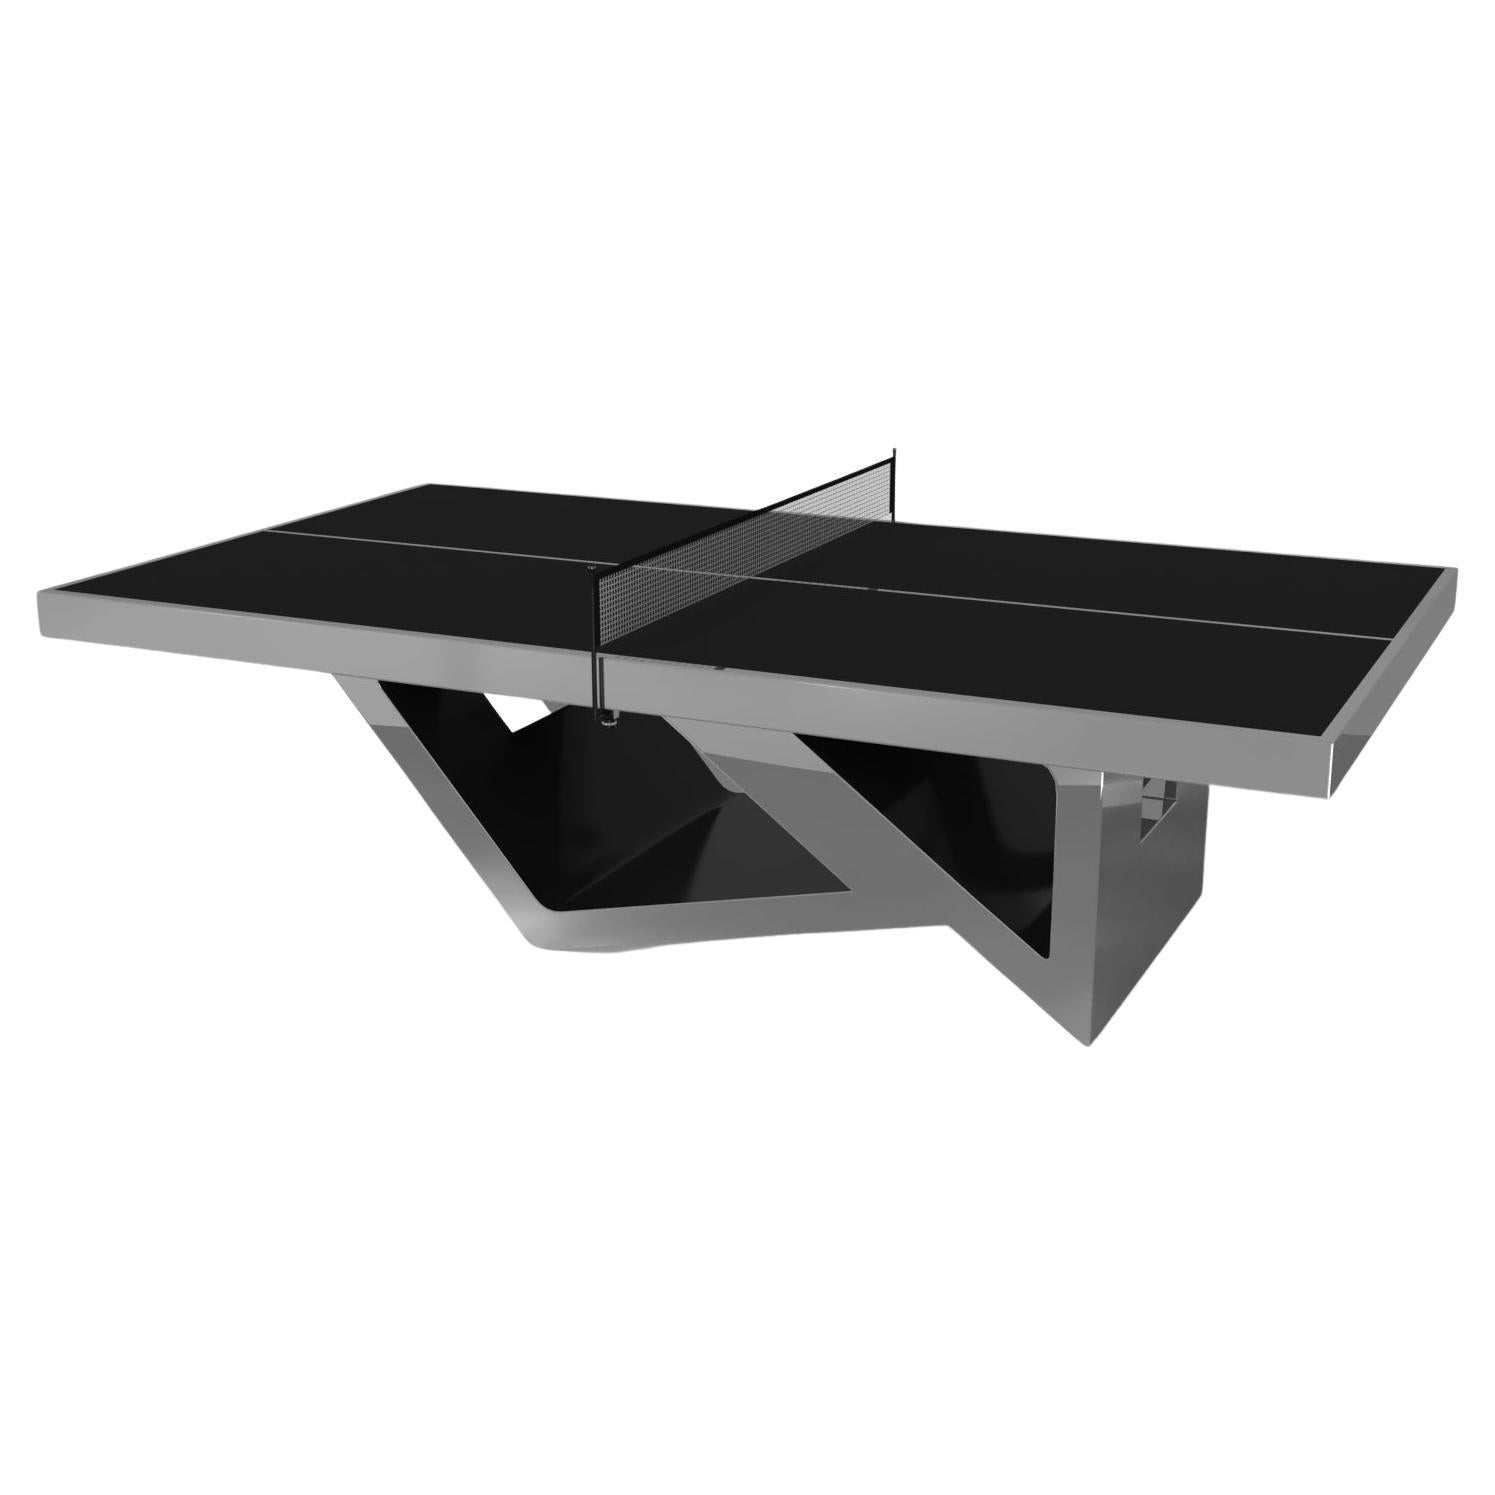 Elevate Customs Rumba Tennis Table/Stainless Steel Sheet Metal in 9'-Made in USA For Sale